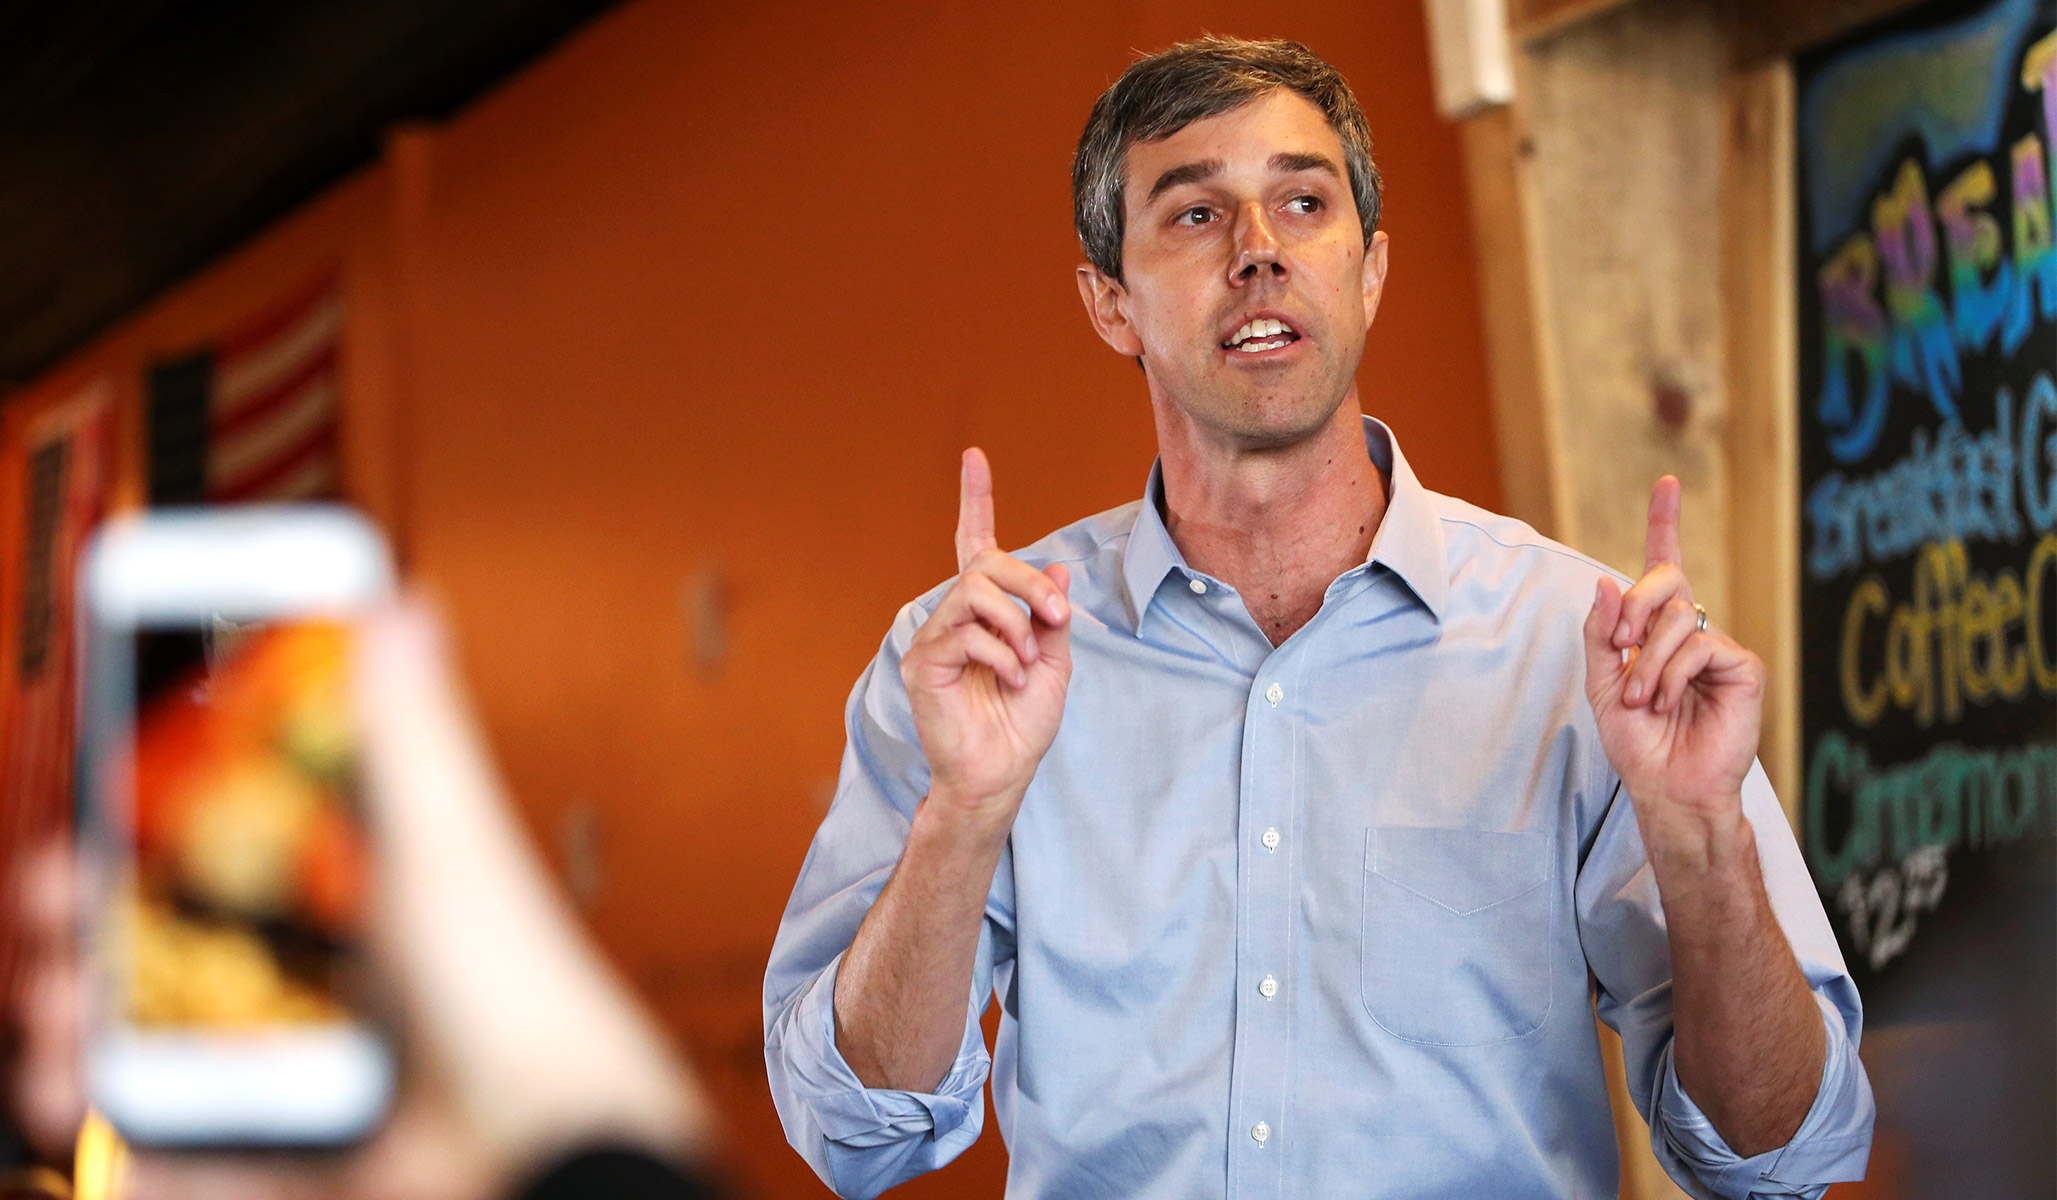 Beto O’Rourke & Abortion 2020 Democratic Candidate Says Planned